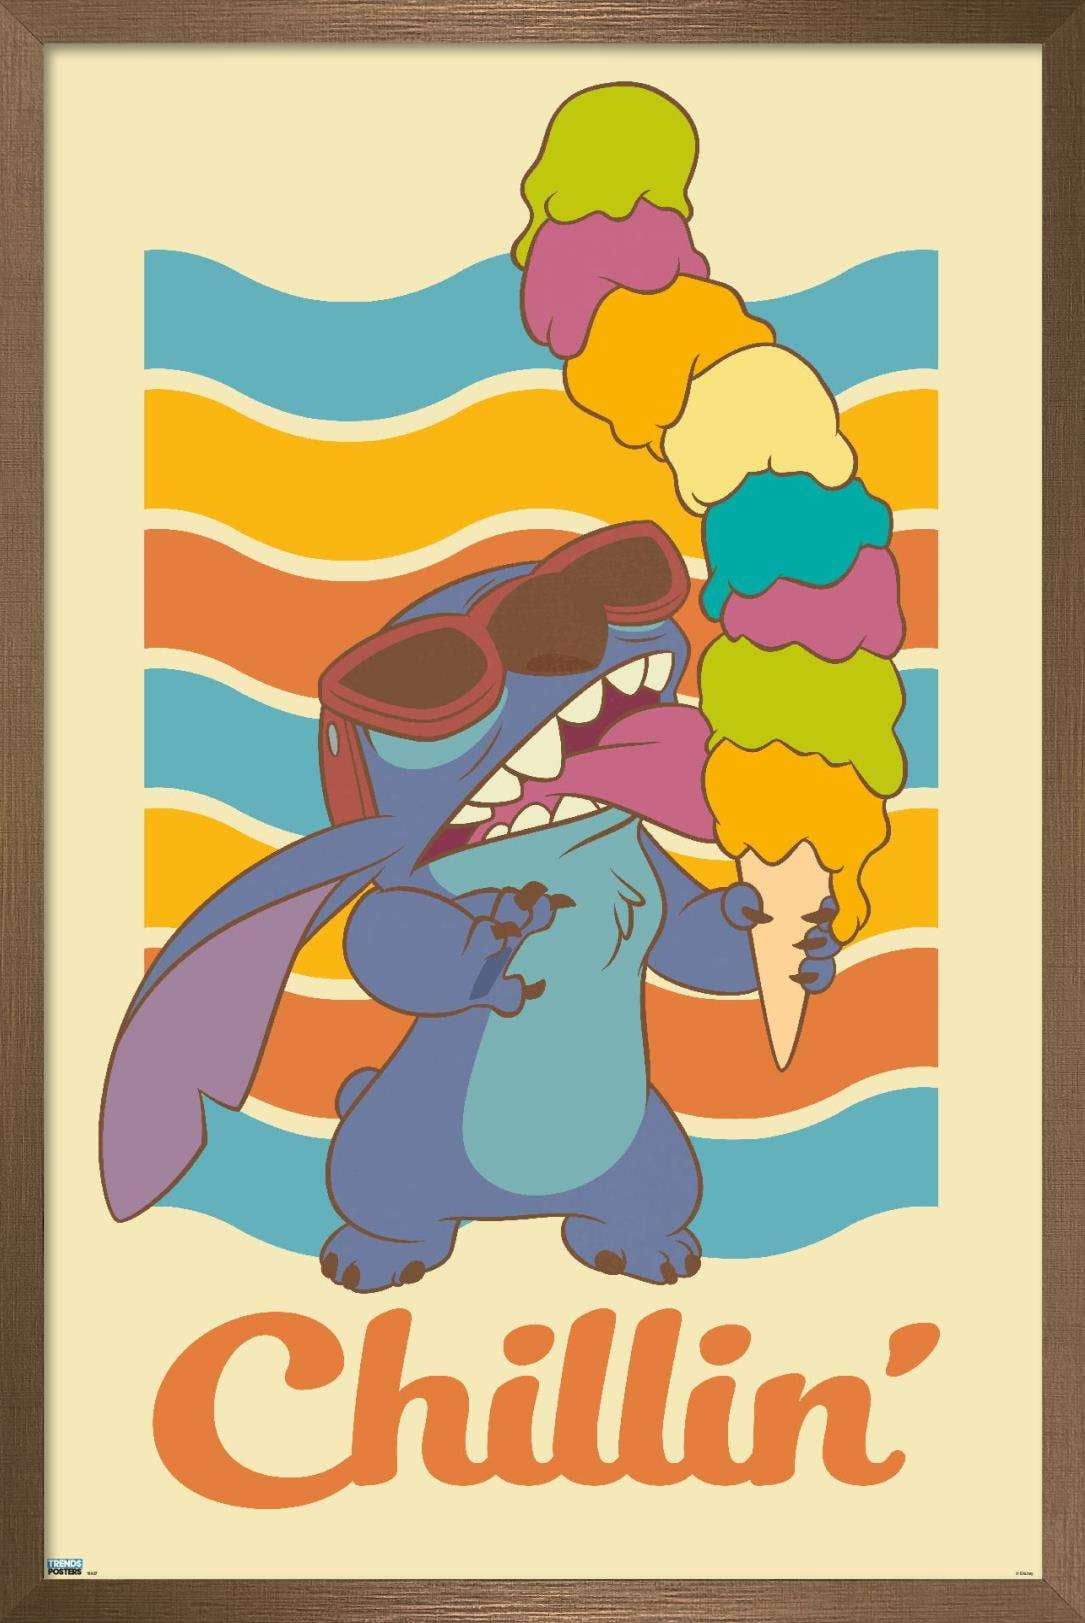 Stitch Merch Poster Art Wall Poster Sticky Poster Gift For Fan